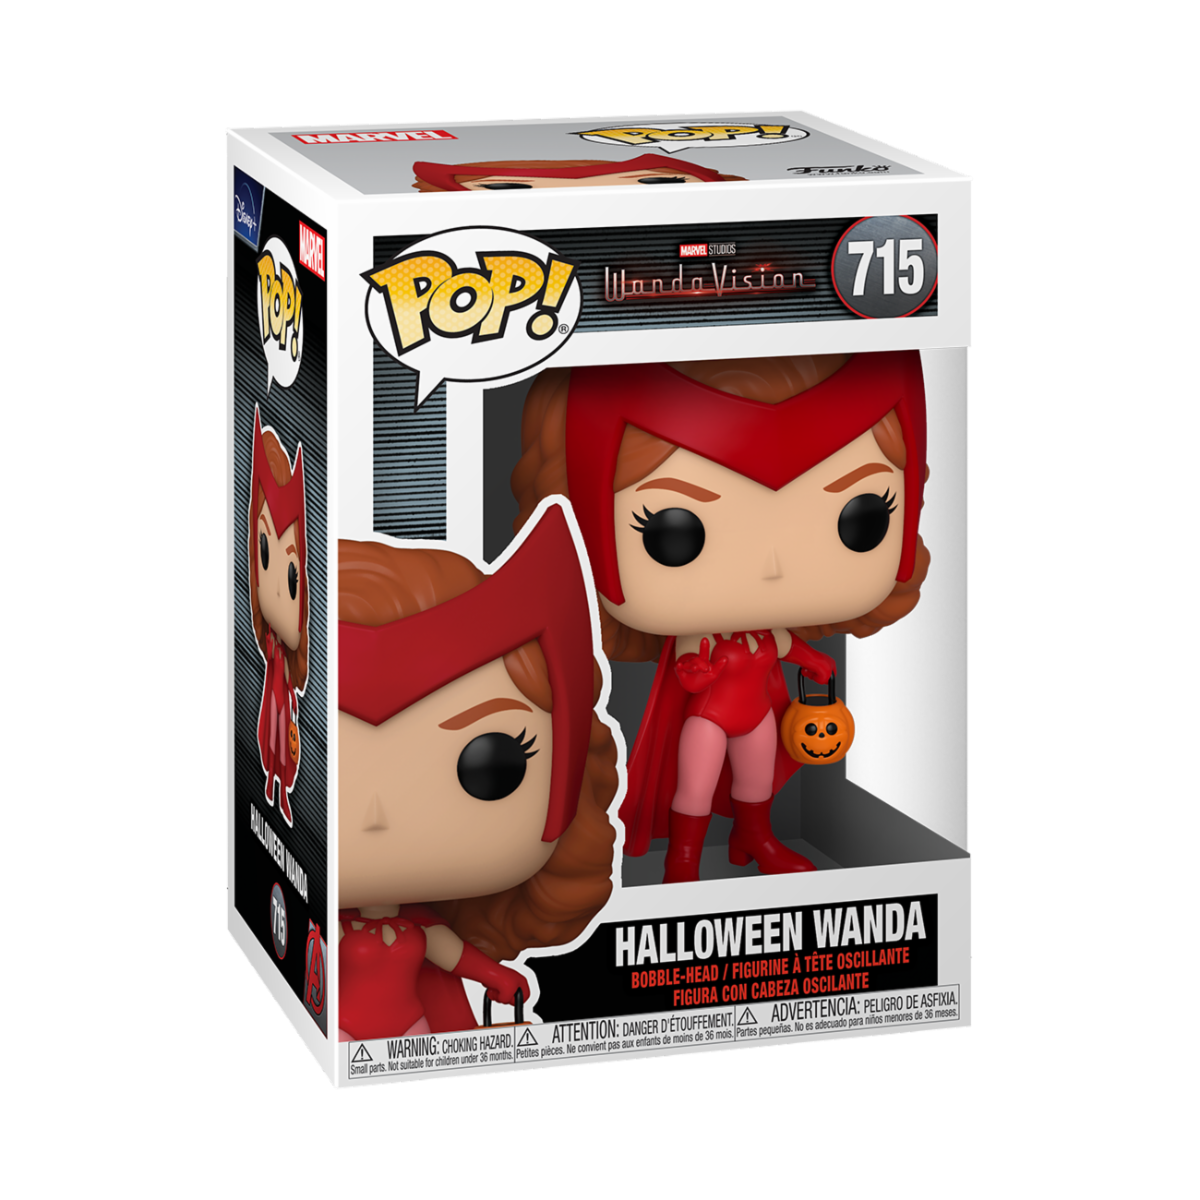  HALLOWEEN WANDA FUNKO POP MARVEL WANDAVISION ELIZABETH OLSEN #715</p><BR>In Stock<BR>In Stock Safety Information<br>Warning: Not suitable for children under 3 years. Small Parts. 